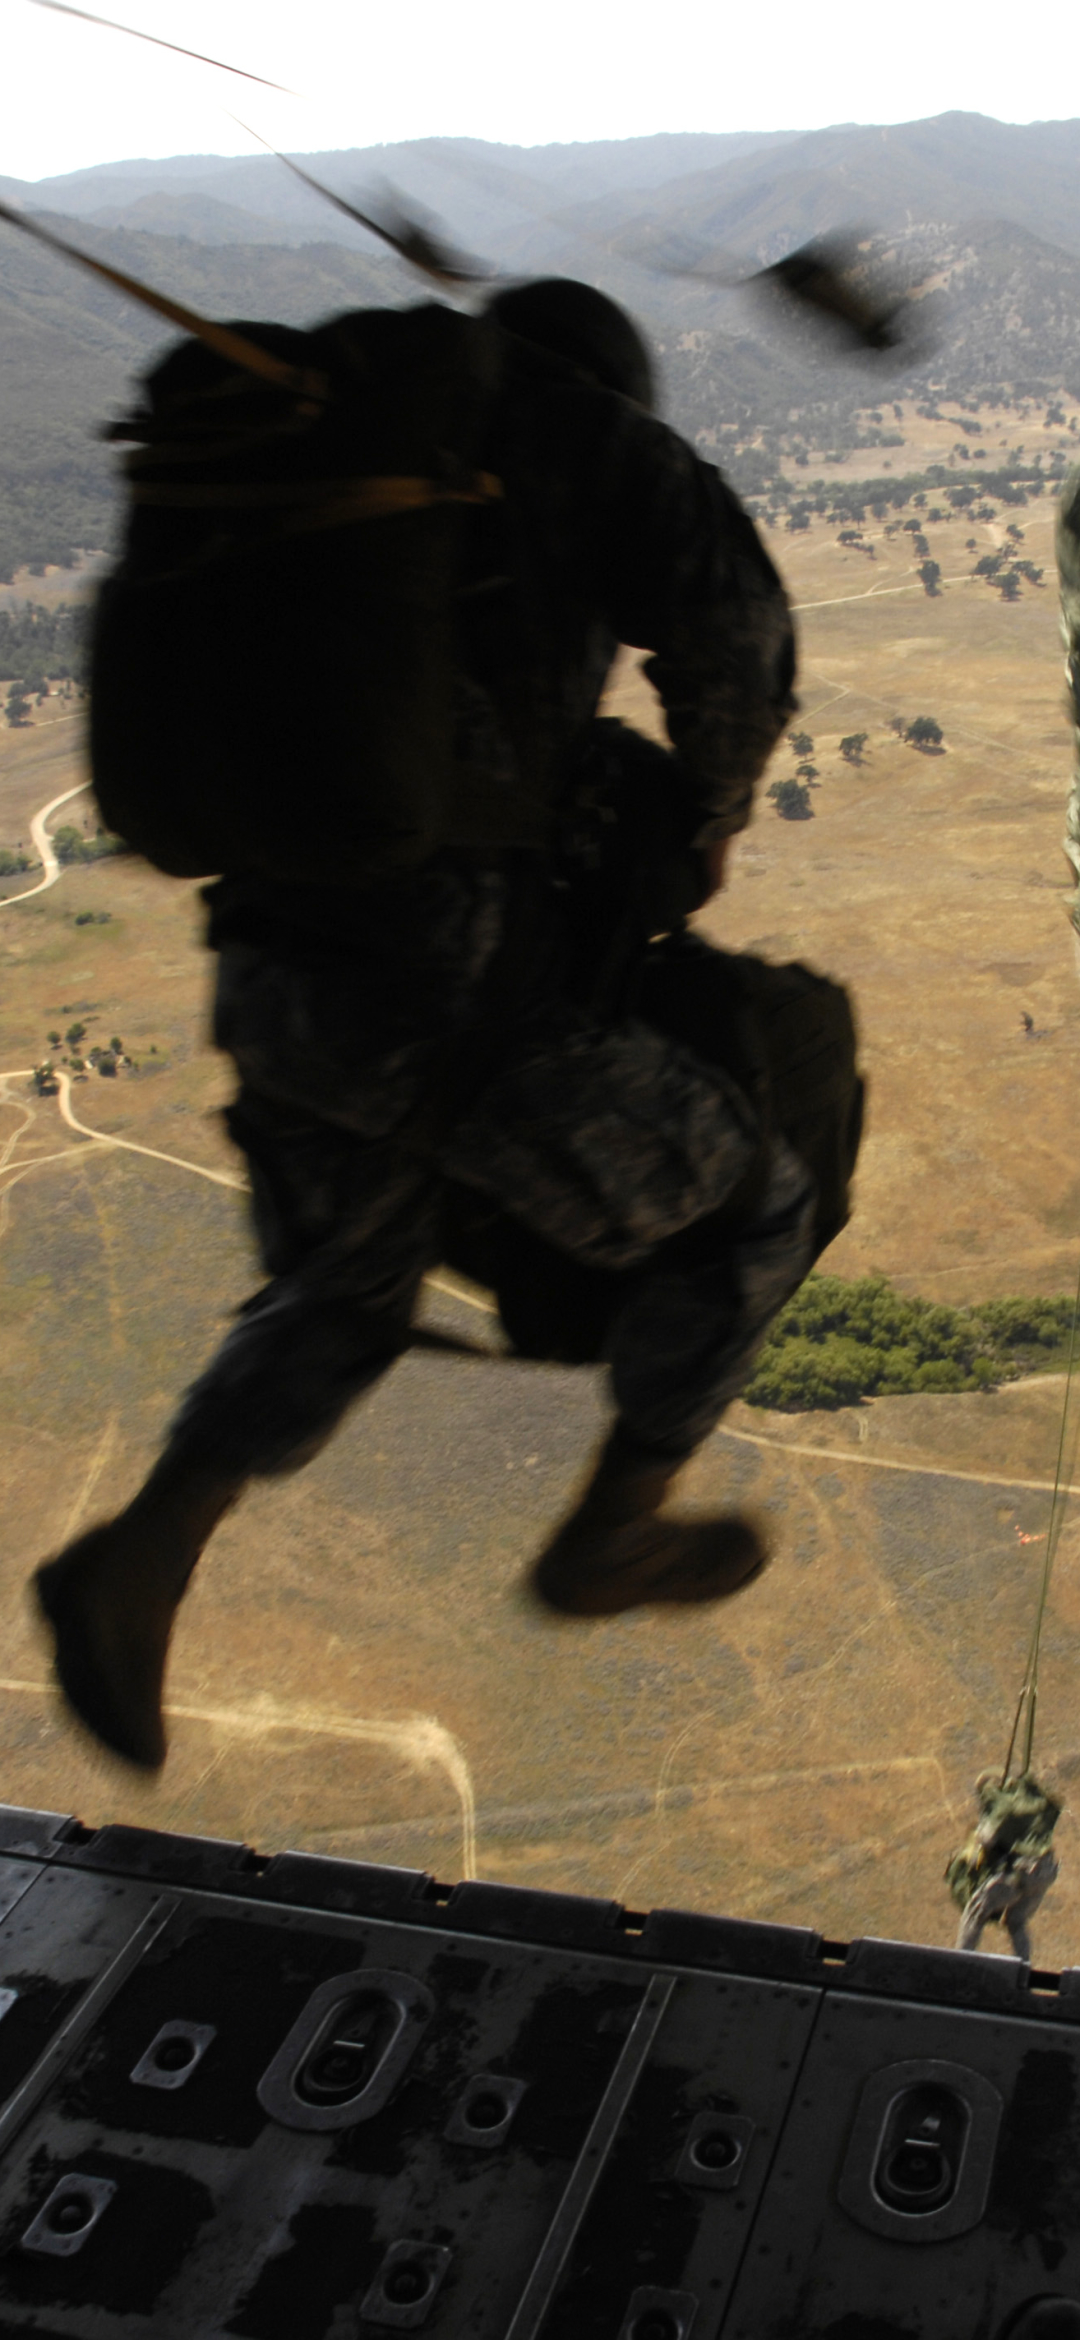 wallpapers military, soldier, parachuting, paratrooper